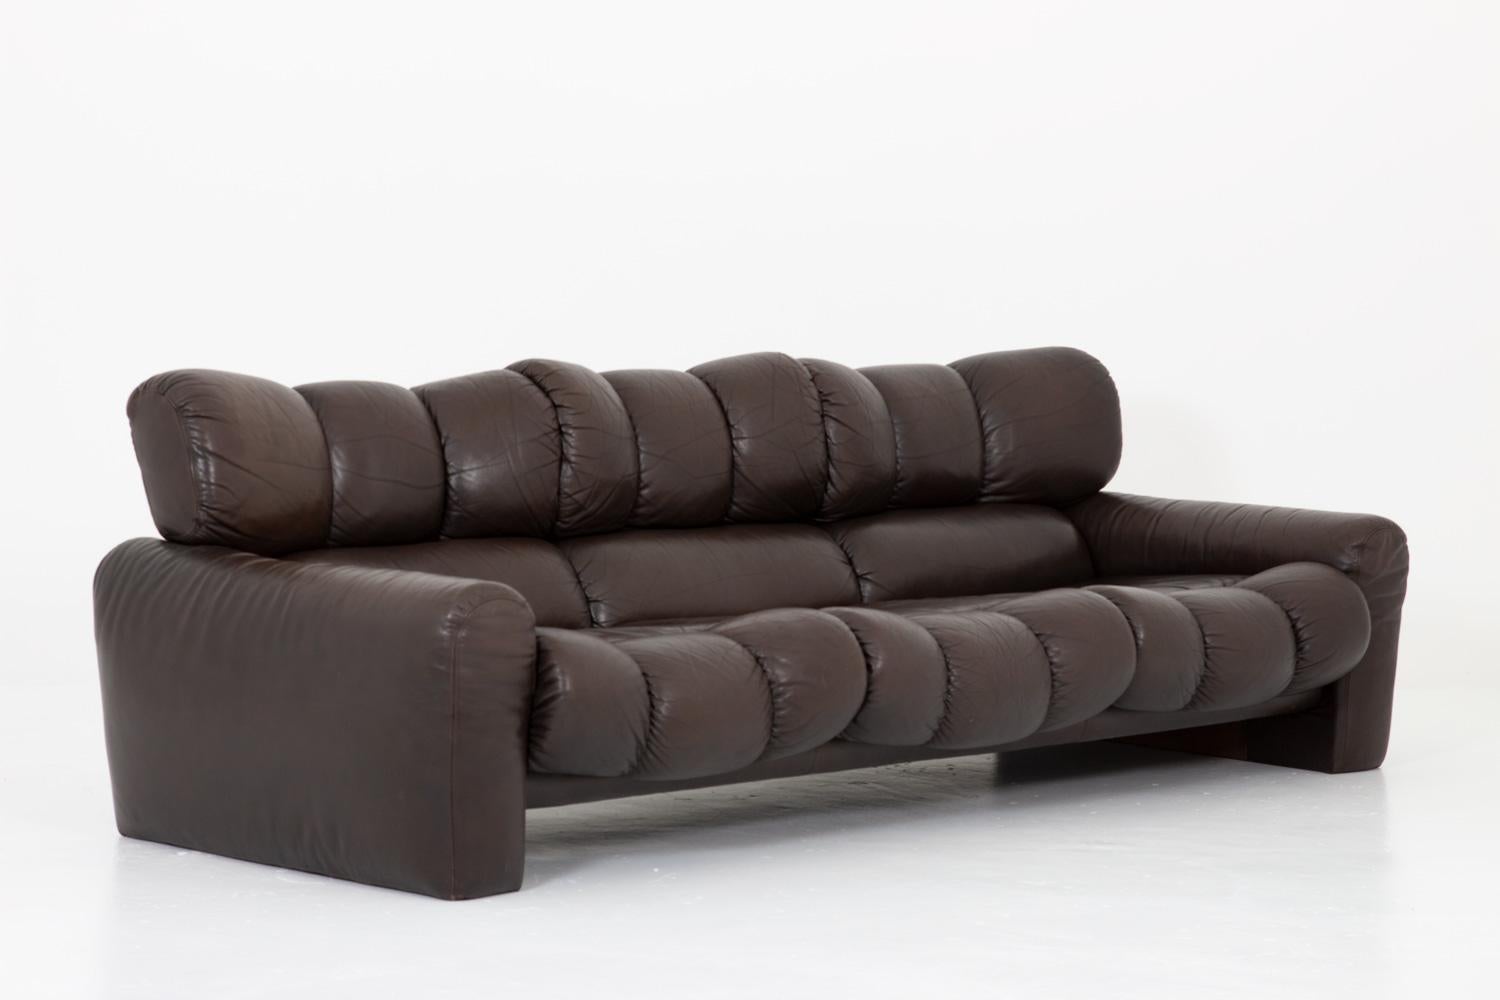 Rare sofa designed by by Tongiani Stefanos for Elleduemila, manufactured on license by IKEA in 1973.
This sofa is upholstered in brown leather and is constructed with a high sense of quality and design. 
A matching arm chair is also available.